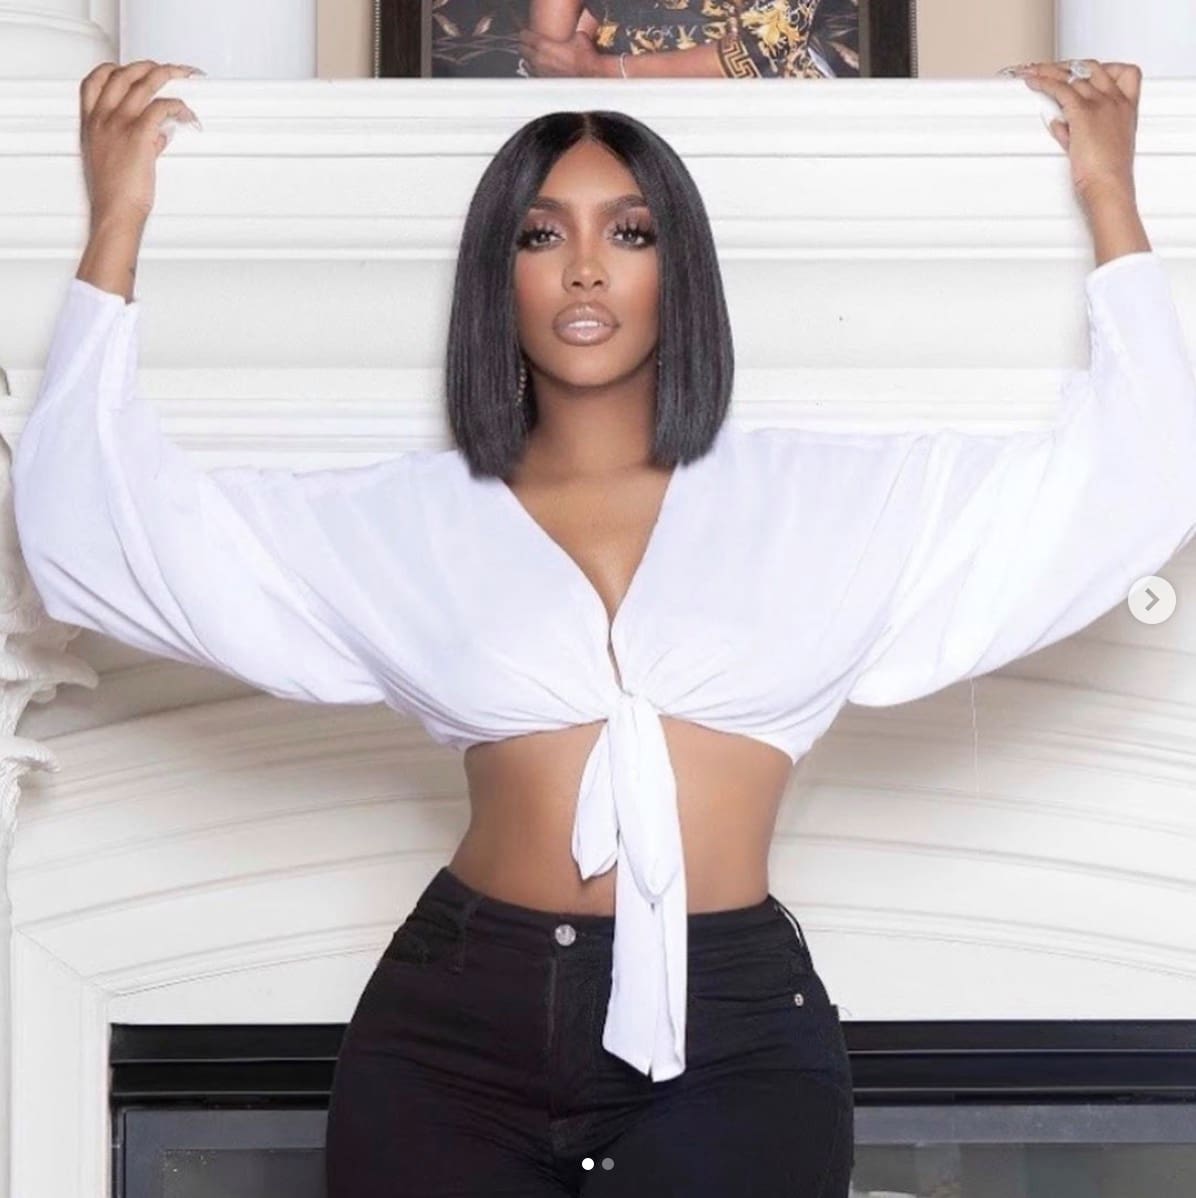 ”porsha-williams-has-fans-jaws-dropping-with-new-pics-and-clips-from-her-vacay”